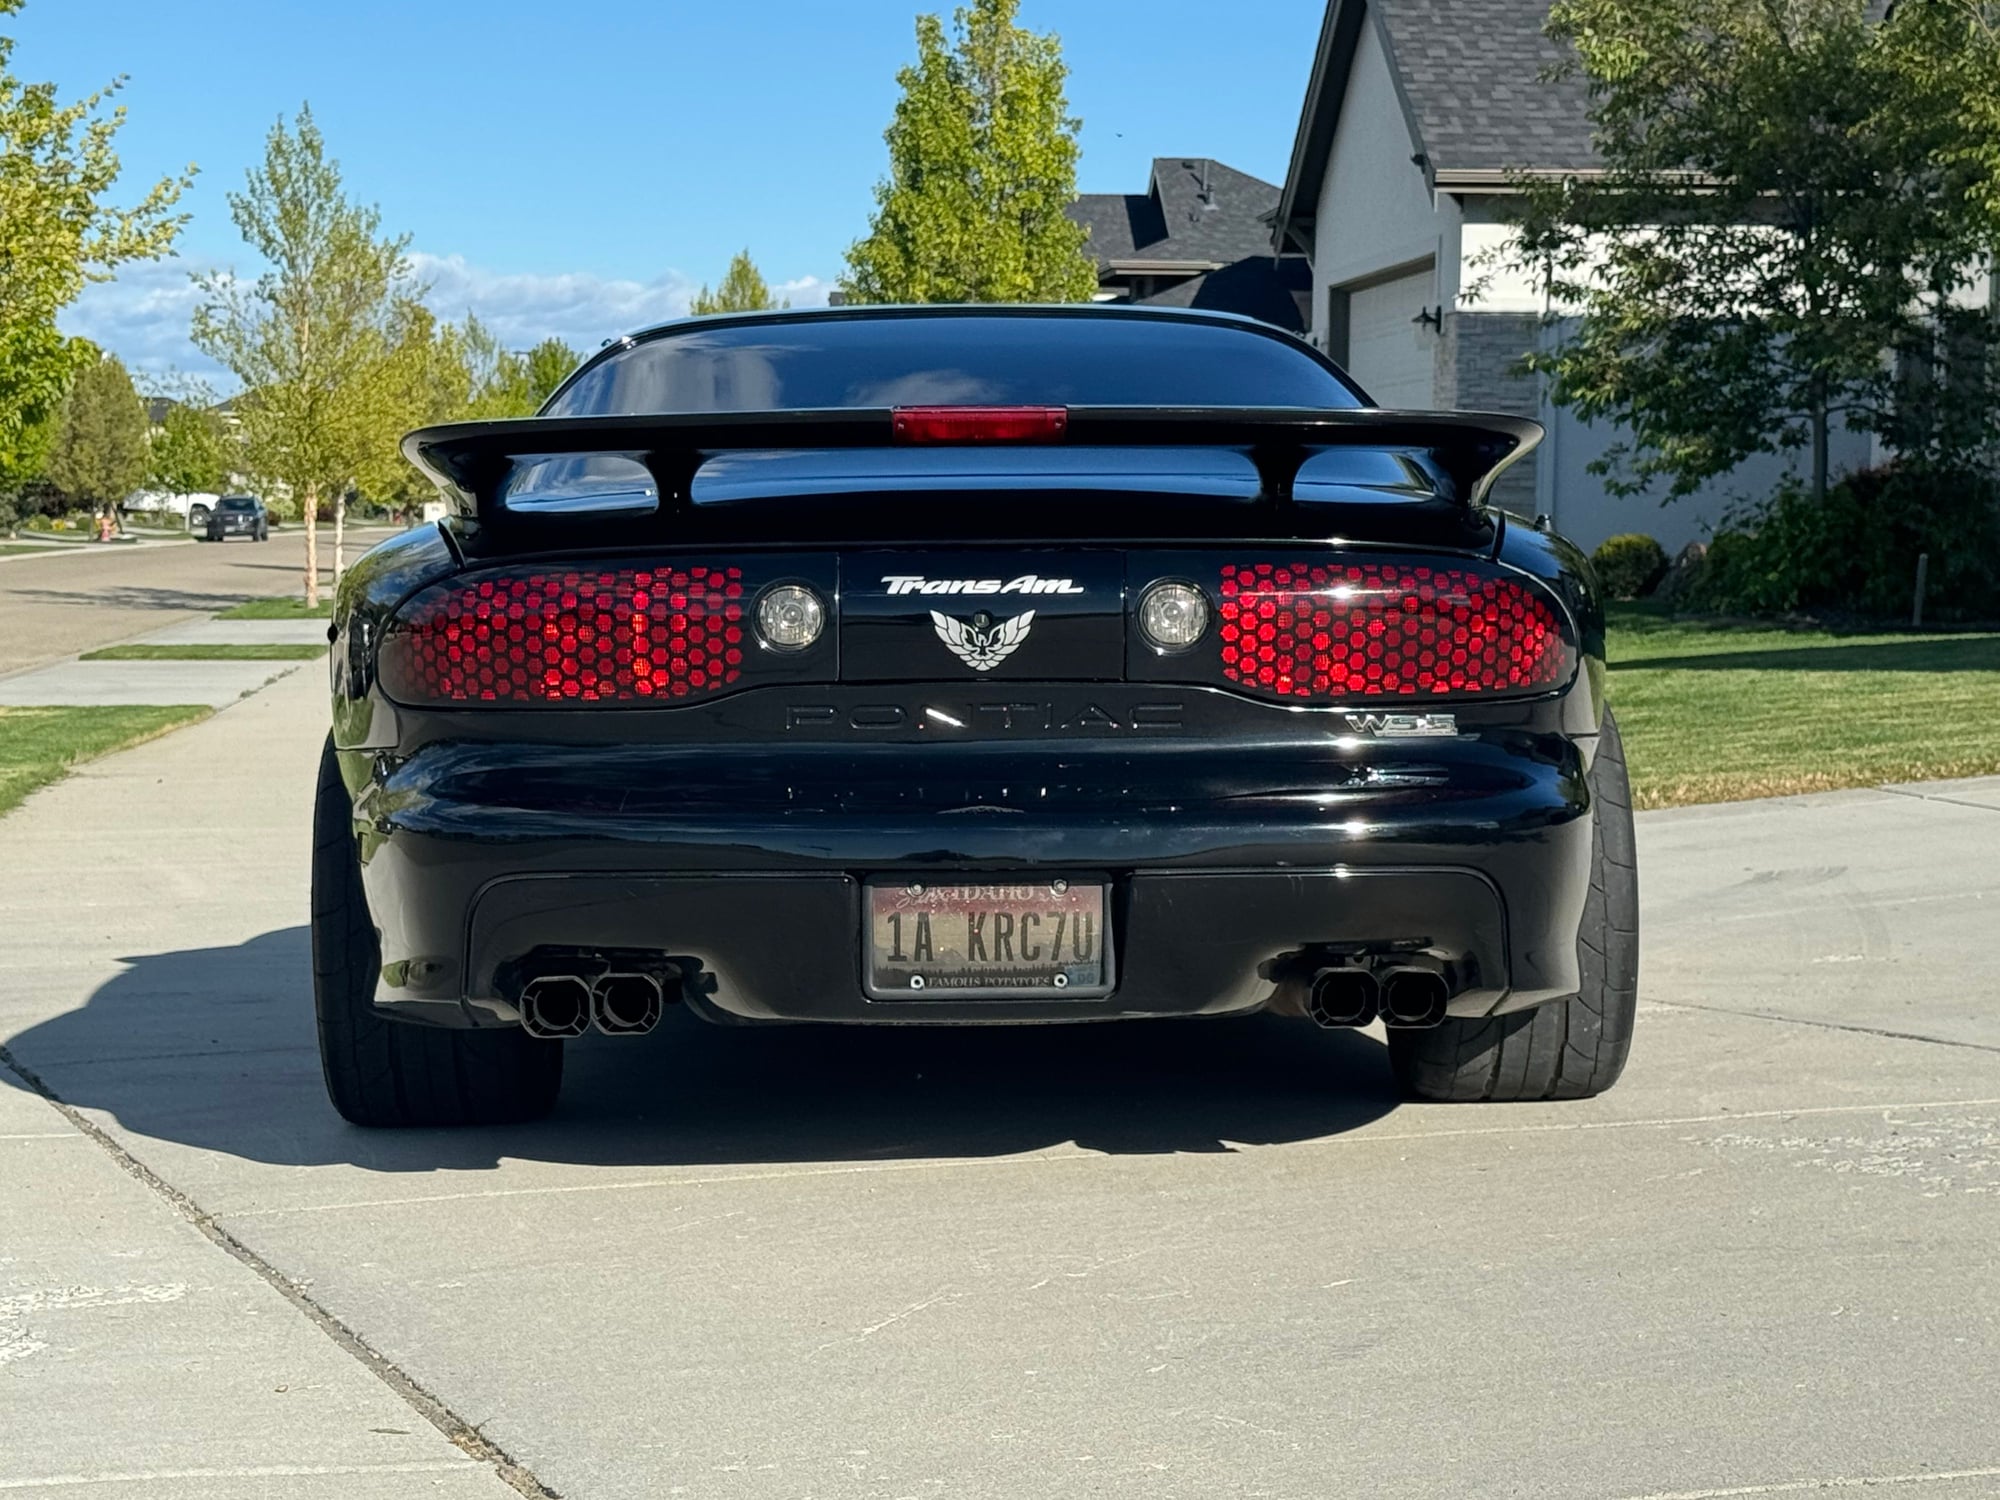 2000 Pontiac Firebird - 2000 Firebird Procharged WS6 600whp - Used - VIN 2g2fv22gxy2137639 - 98,000 Miles - 8 cyl - 2WD - Automatic - Coupe - Black - Meridian, ID 83642, United States